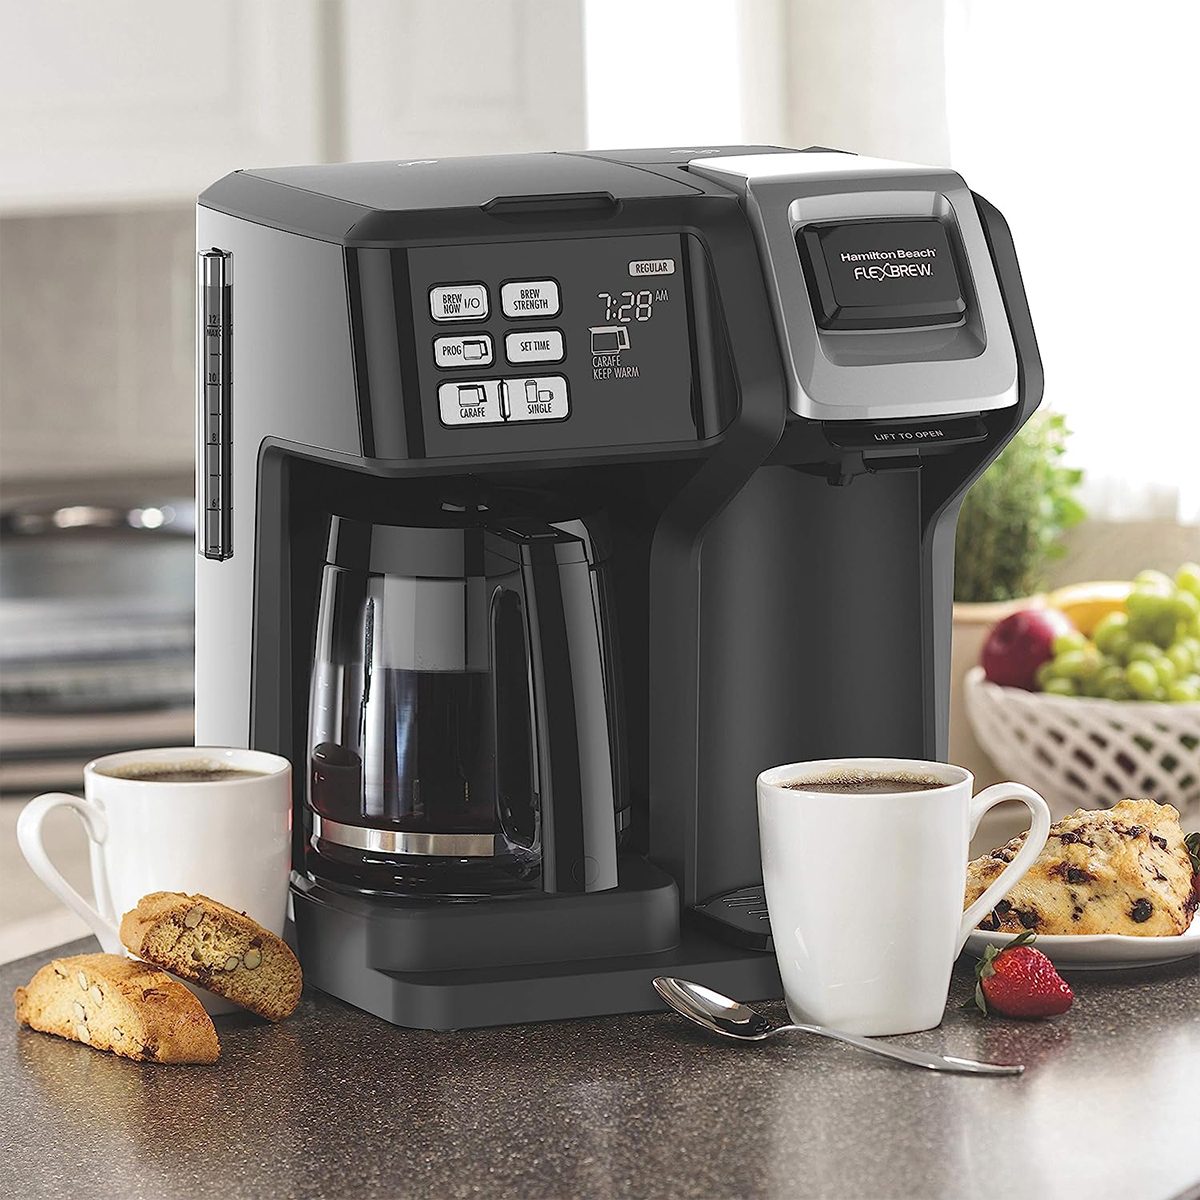 https://www.tasteofhome.com/wp-content/uploads/2022/11/These-Coffee-Maker-Deals-Are-Grounds-for-Celebration_1FT_via-amazon.com_.jpg